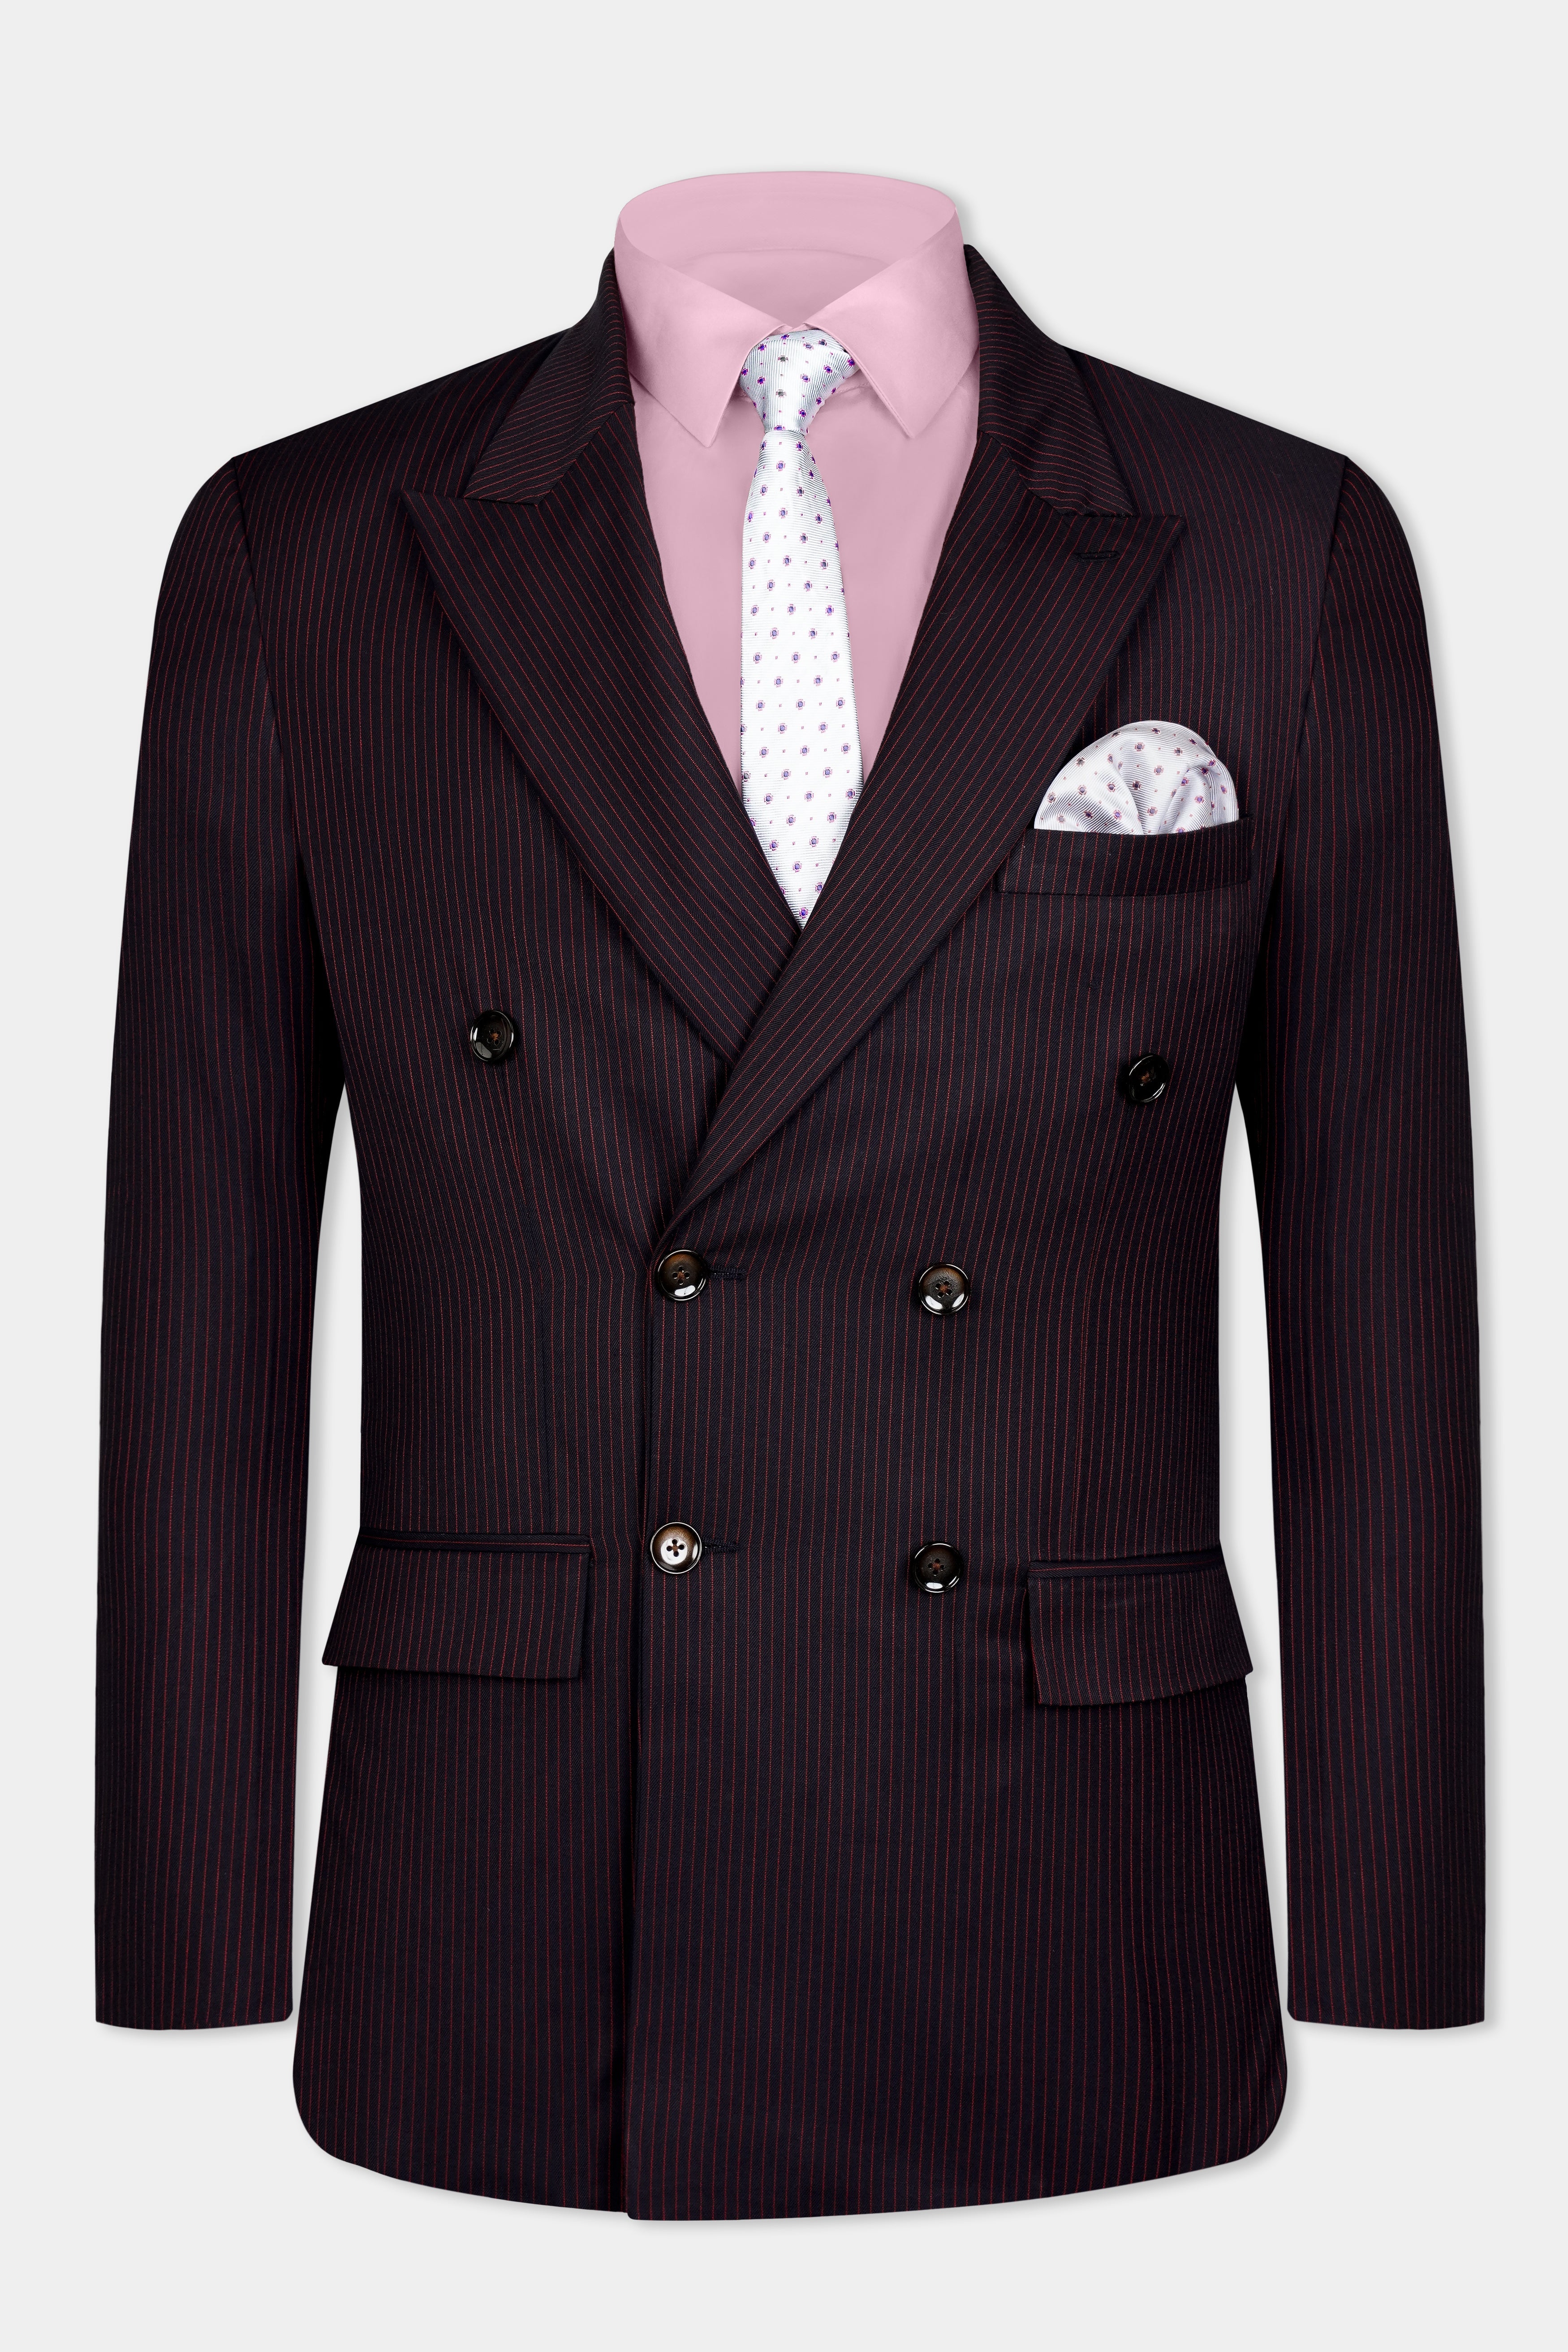 Onyx Maroon and Mandy Pink Striped Double Breasted Wool Rich Blazer